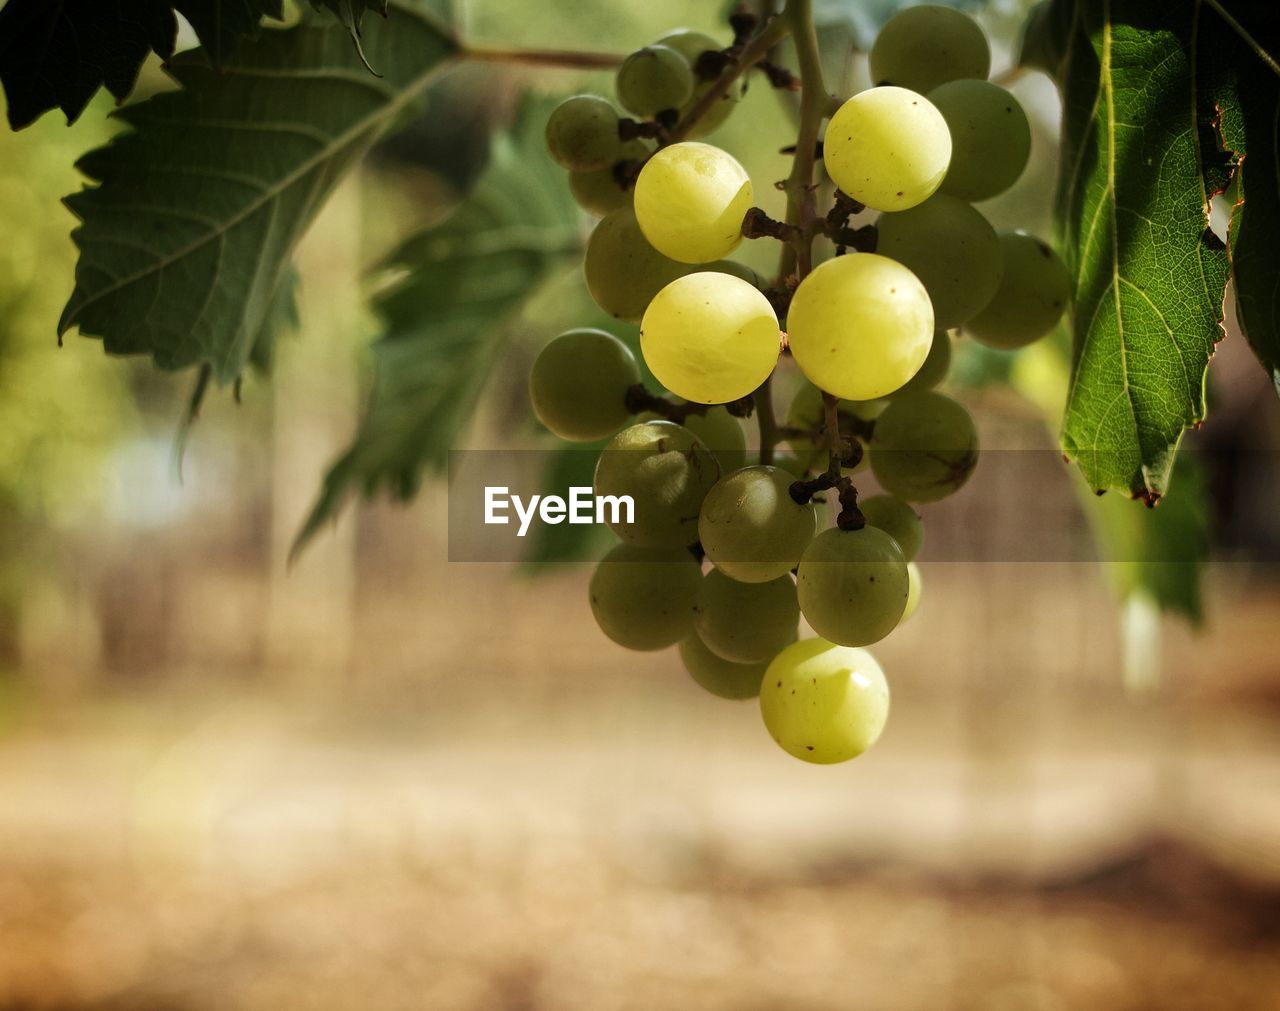 CLOSE-UP OF GRAPES HANGING ON TREE